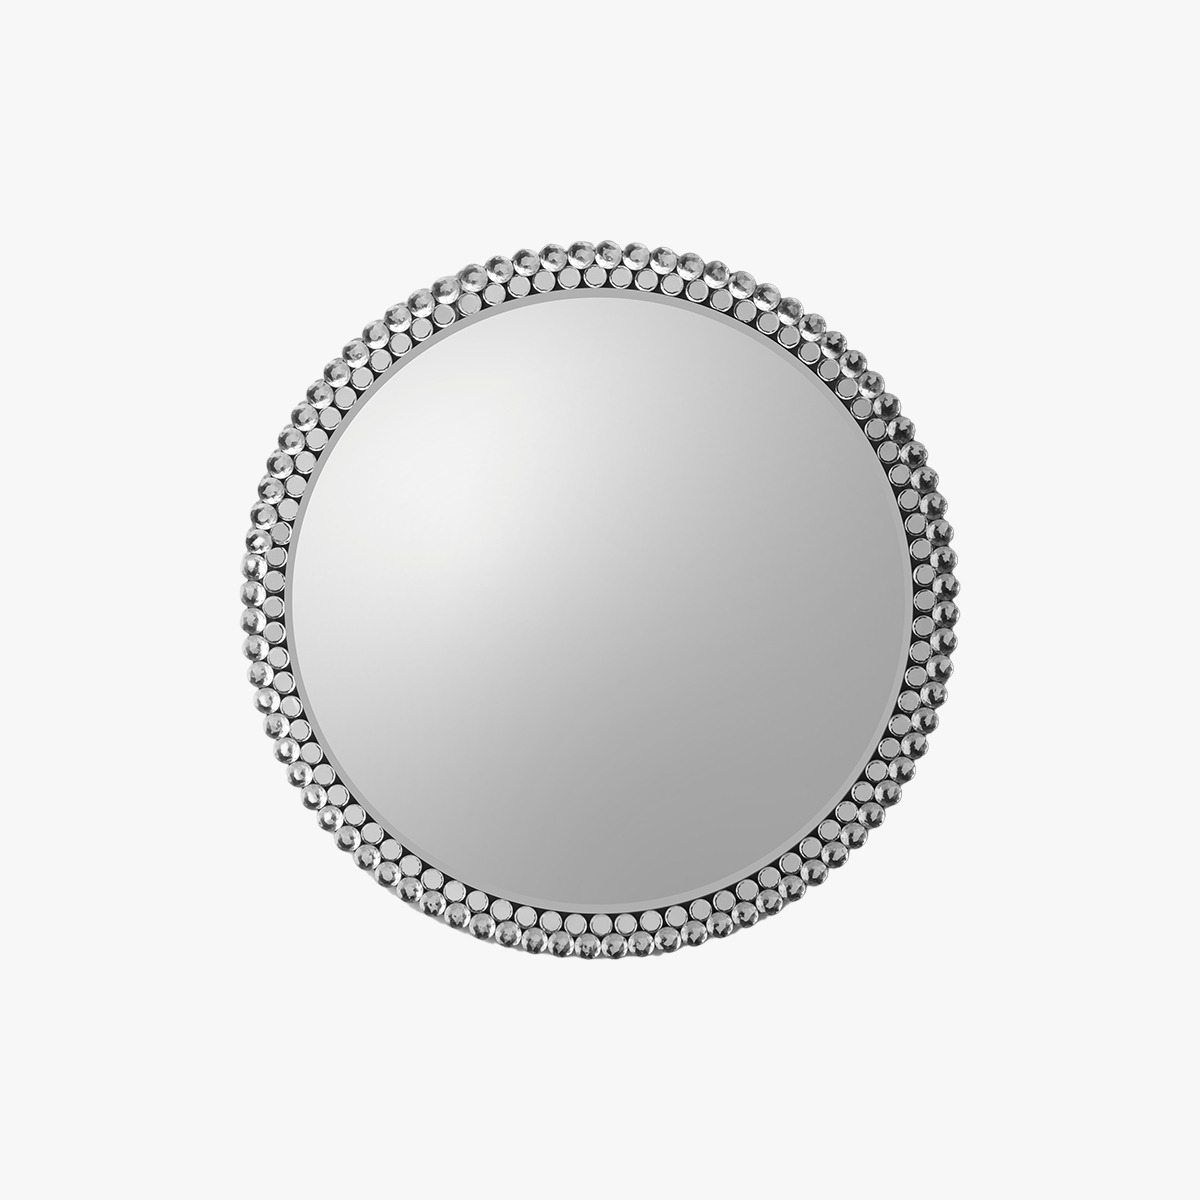 Beau Large Round Wall Mirror